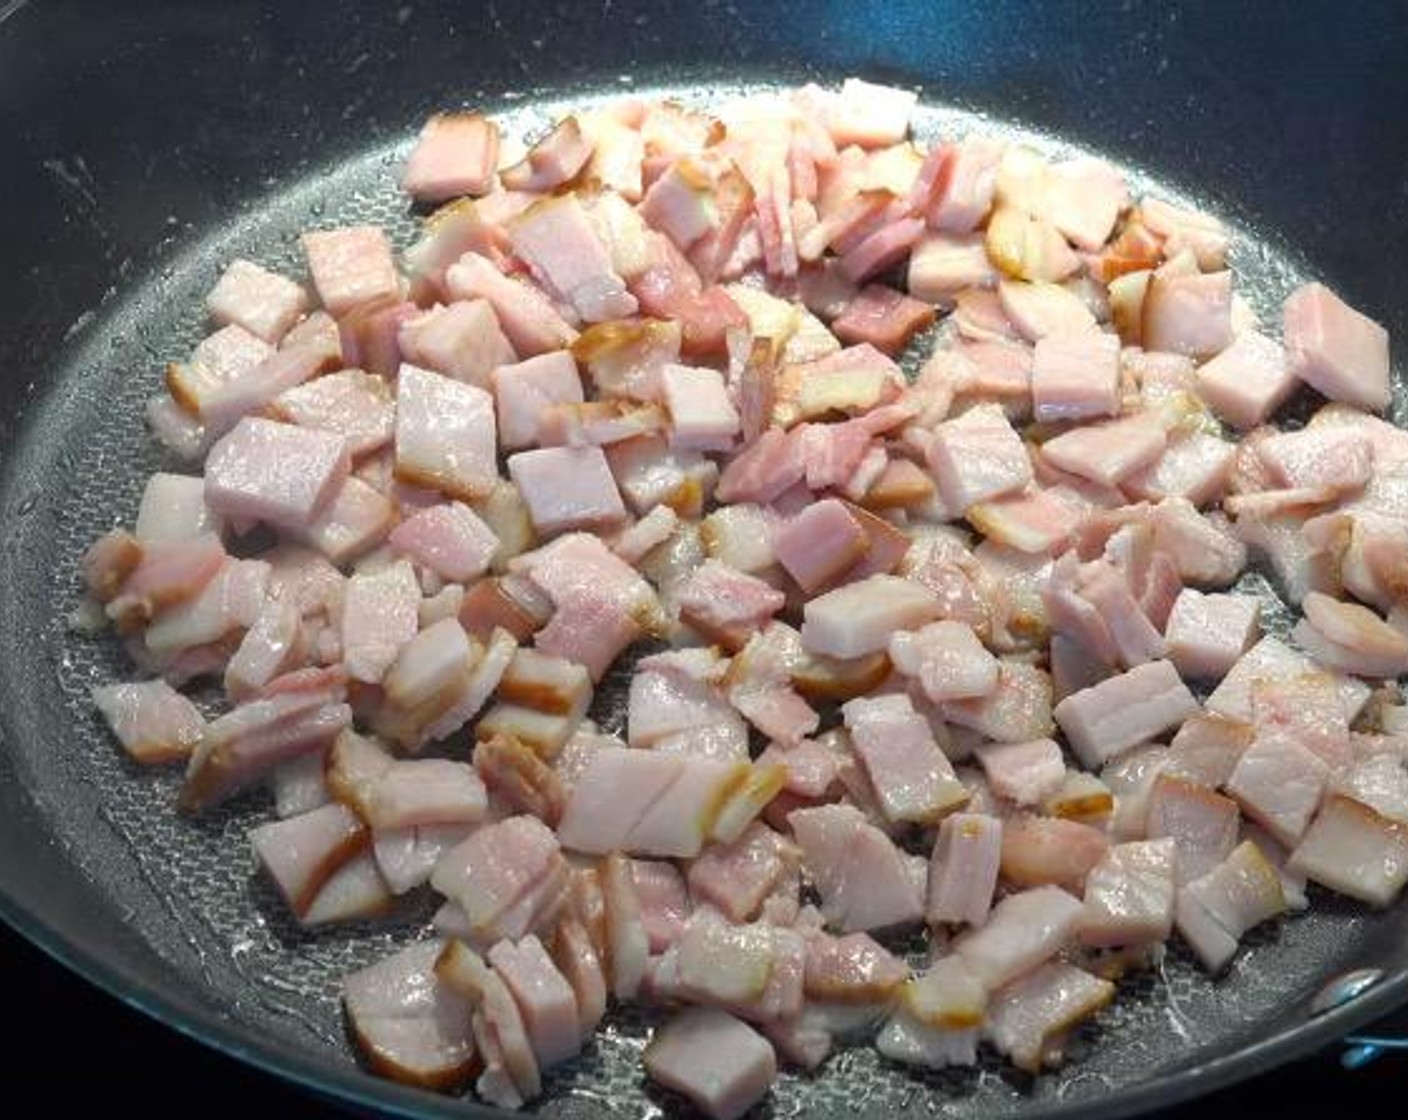 step 2 In a large fry pan over medium heat, add Bacon (4 slices). Cook until slightly crisp.